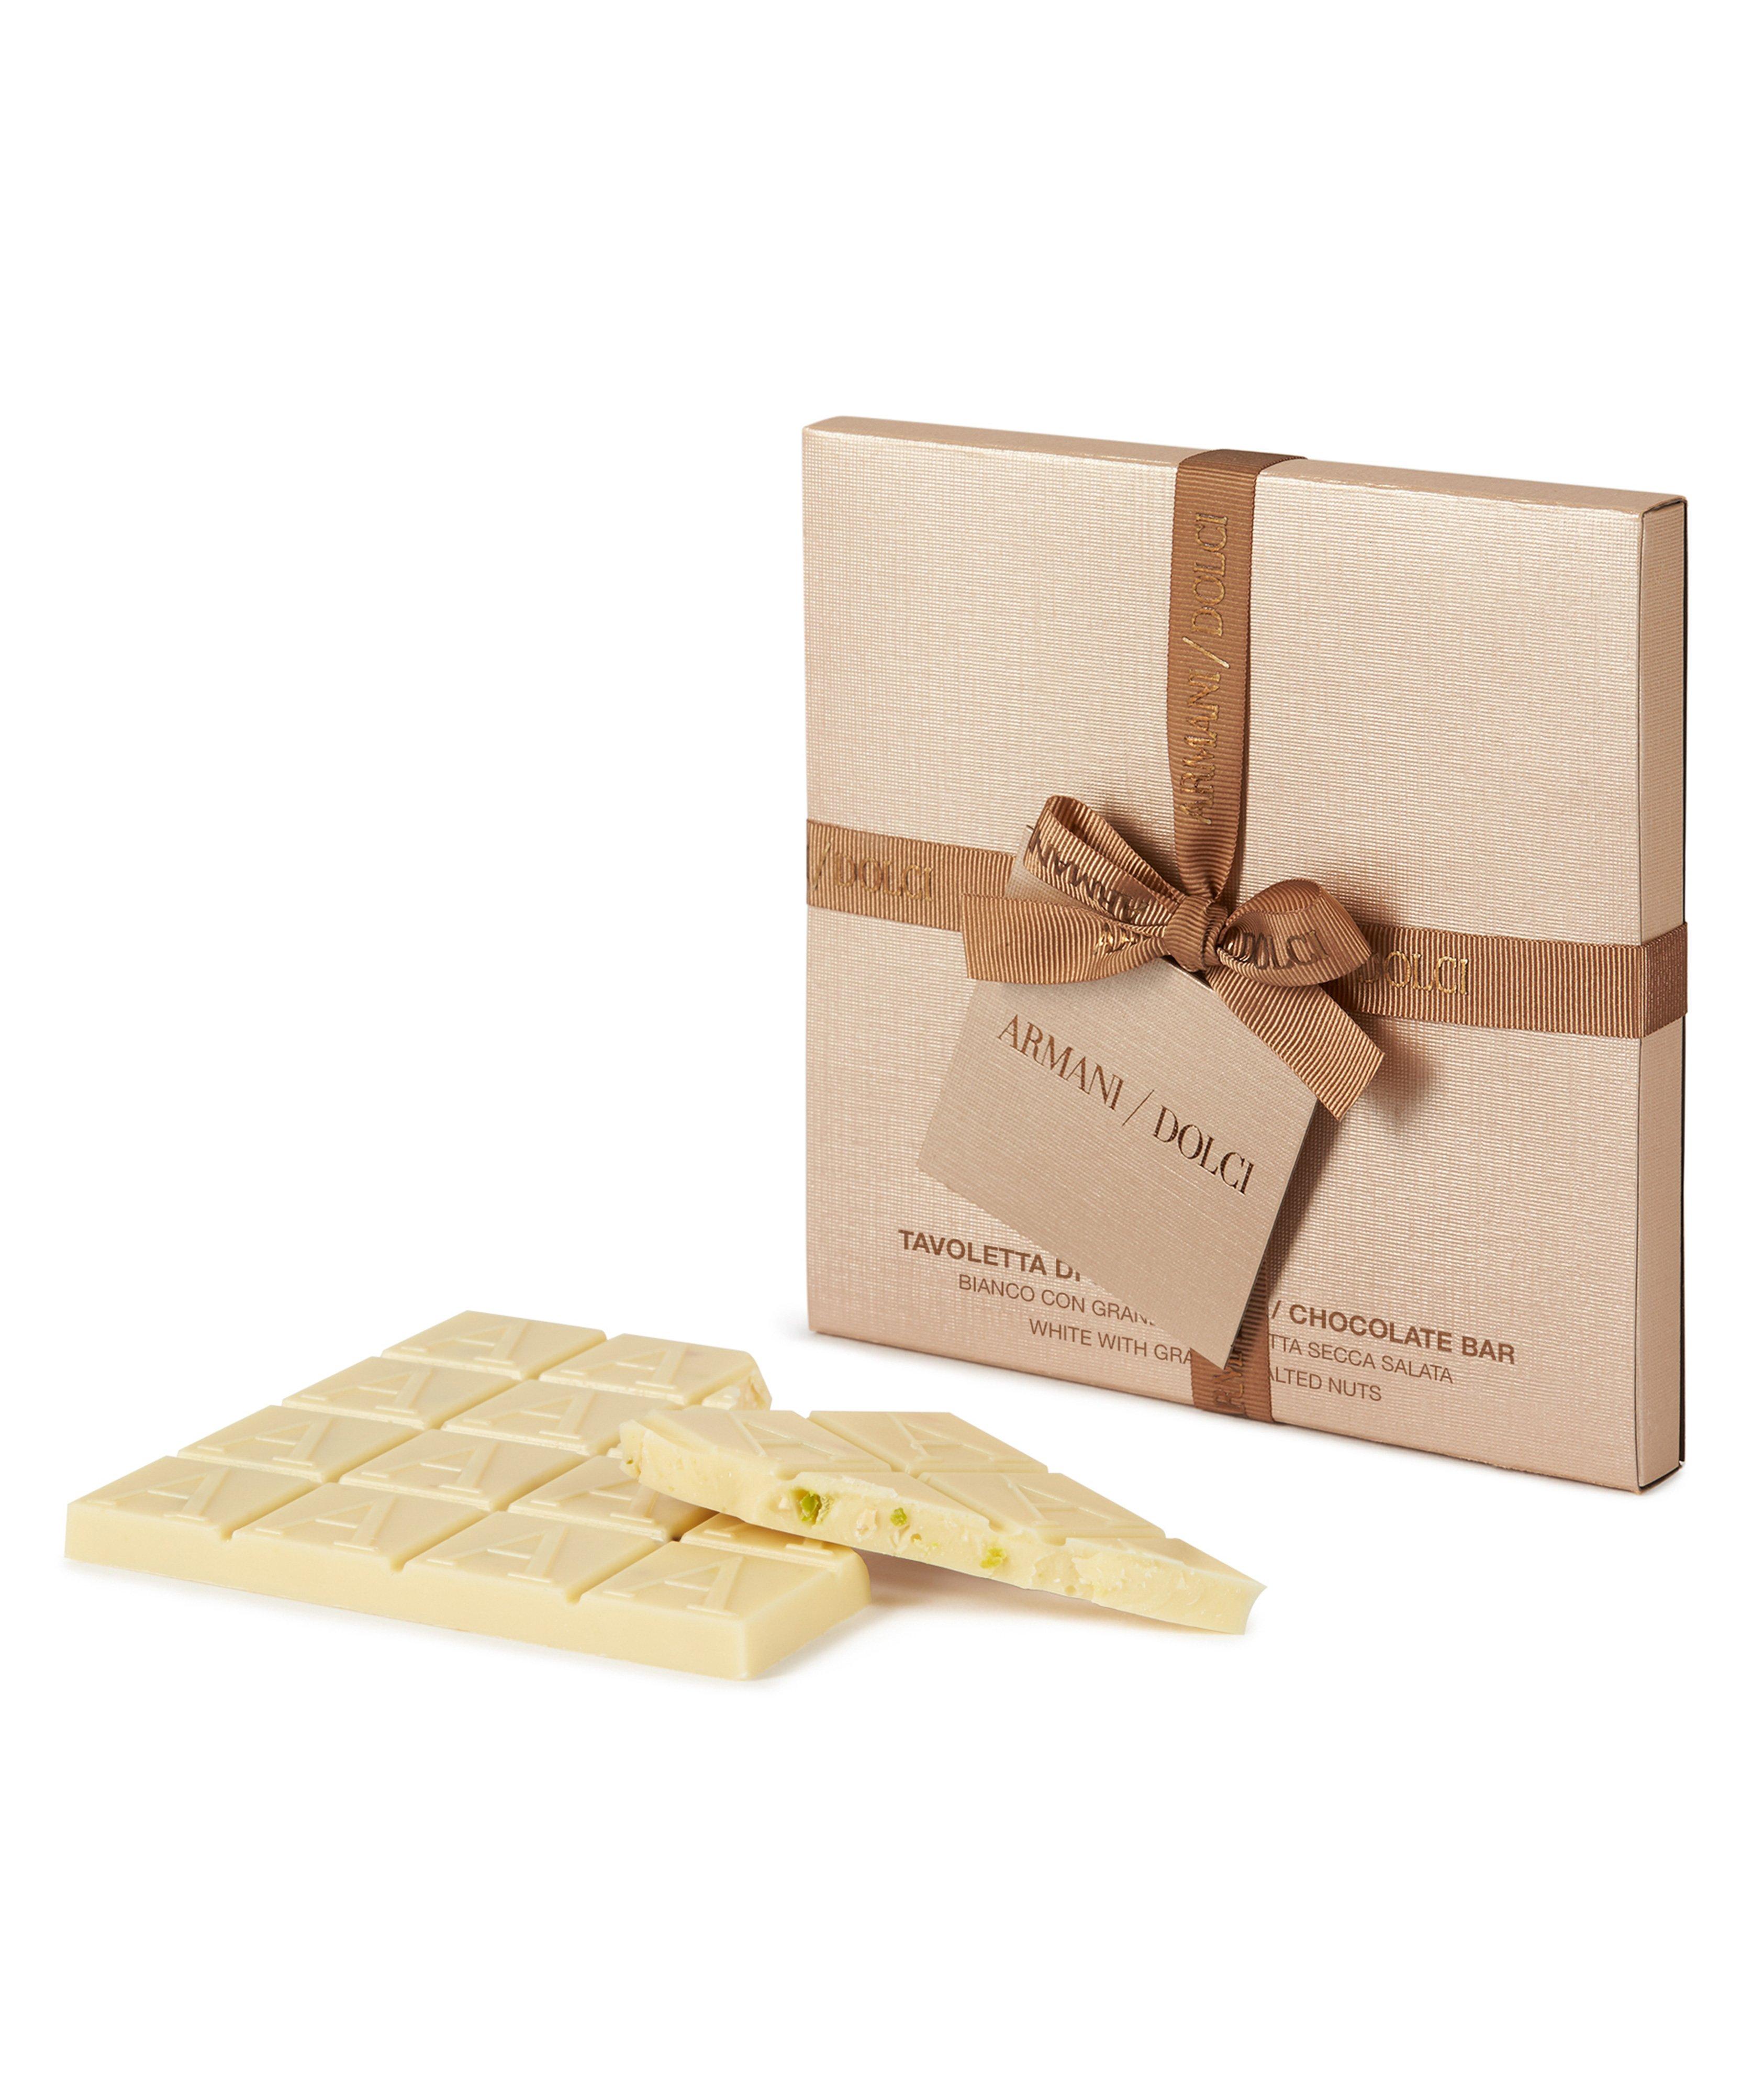 White Chocolate Bar with Salted Nuts image 0